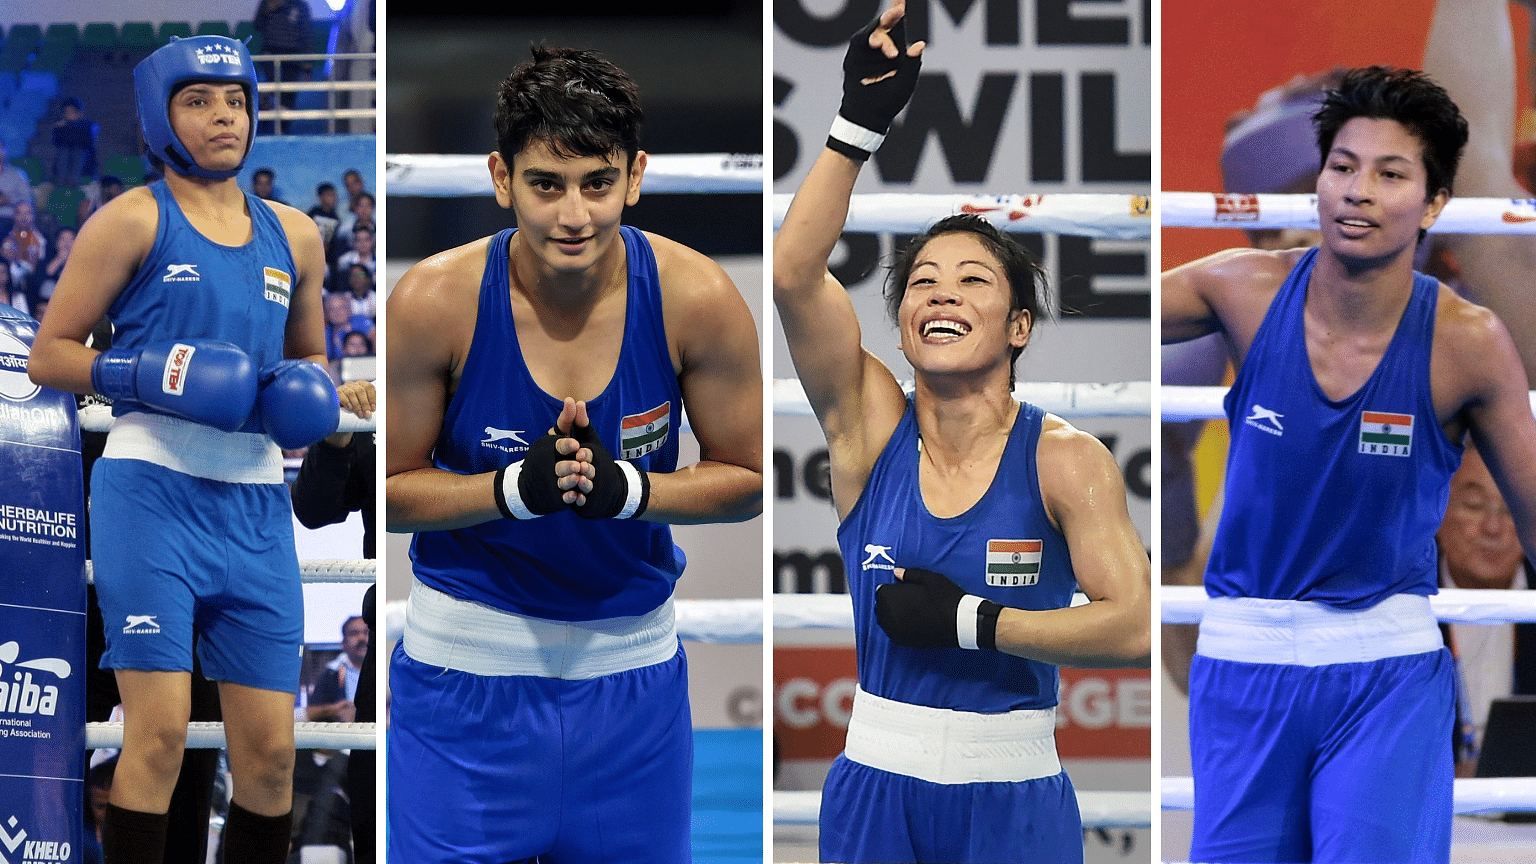 From left: Simranjeet, Sonia Chahal, Mary Kom and Lovlina Borgohain are assured of a medal at this edition of AIBA Women’s World Boxing Championships in New Delhi.